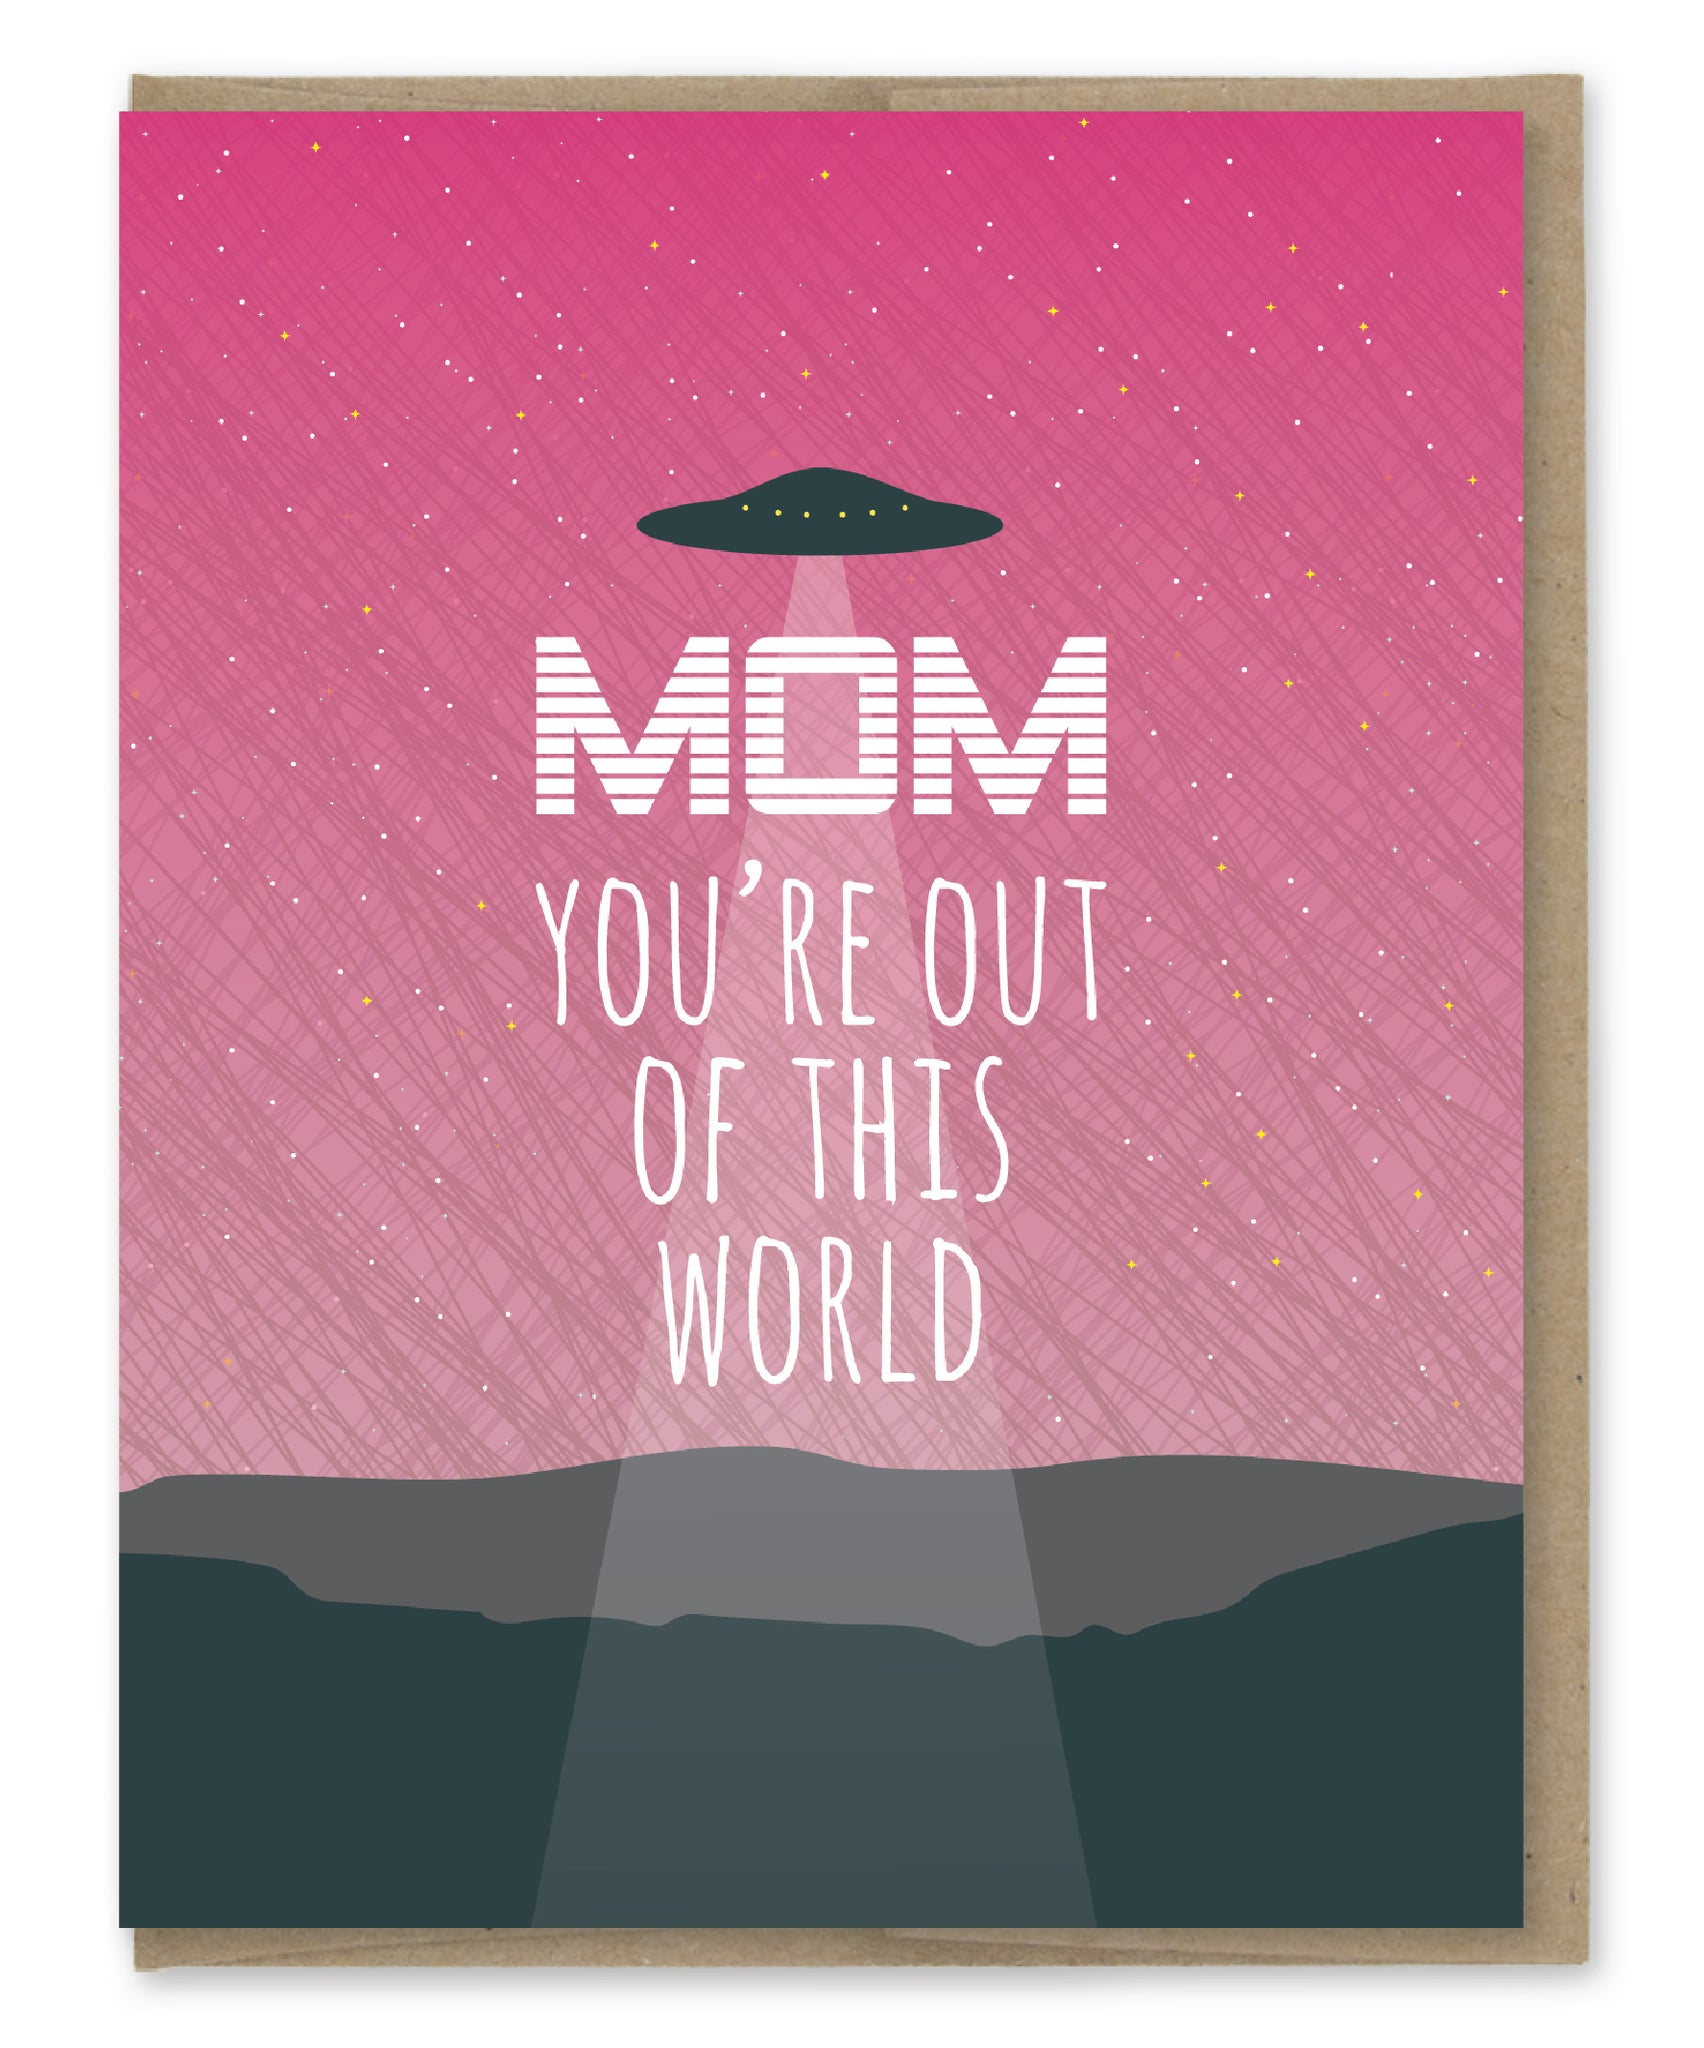 OUT OF THIS WORLD MOM CARD